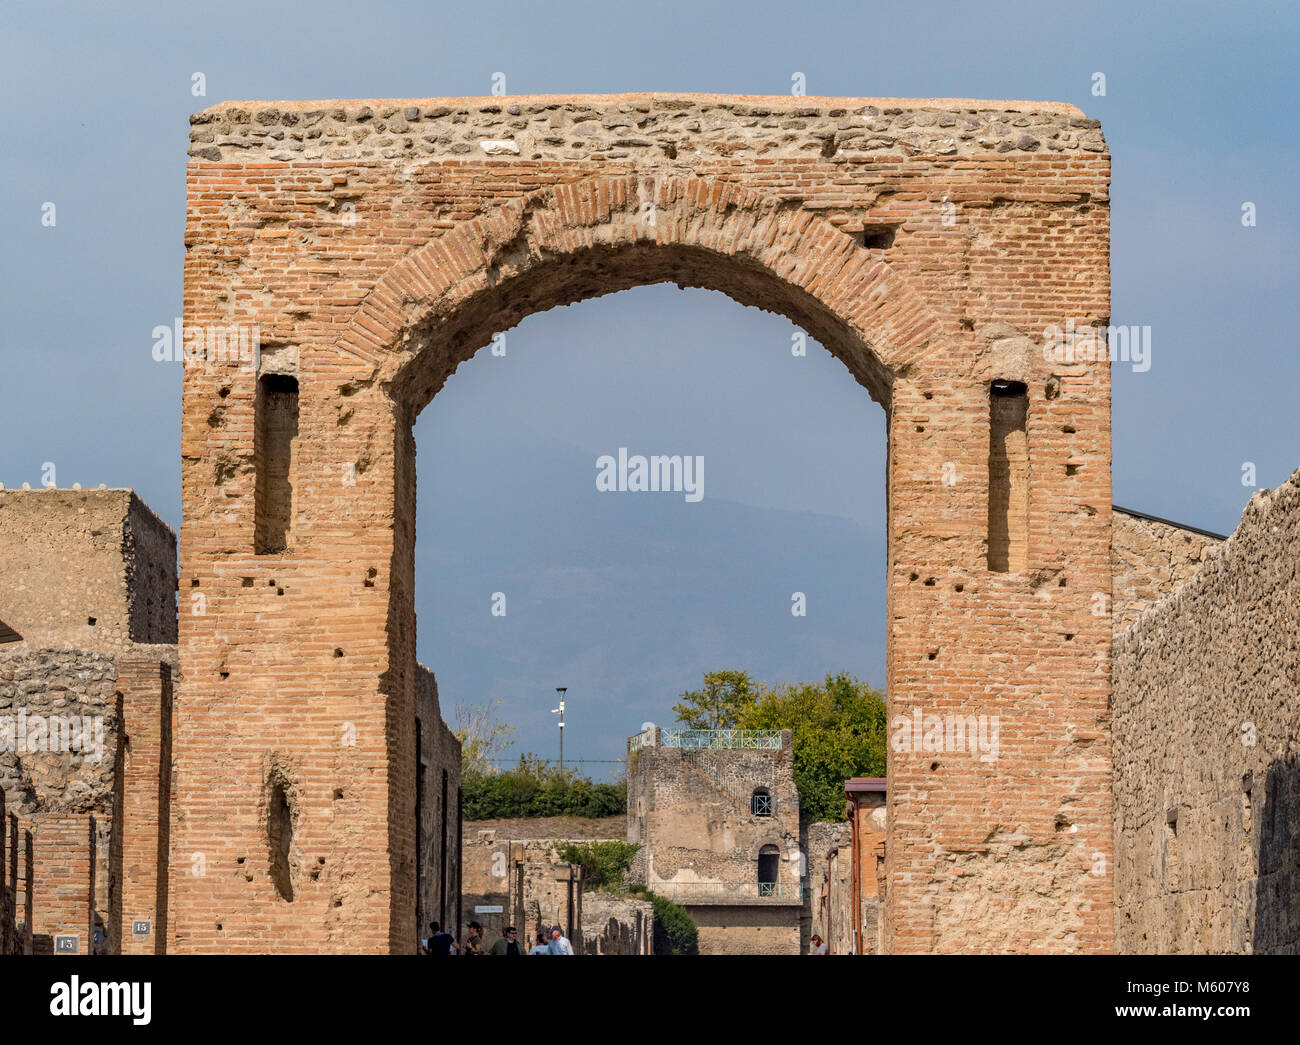 Large arch, Pompeii ruins, Italy. Stock Photo